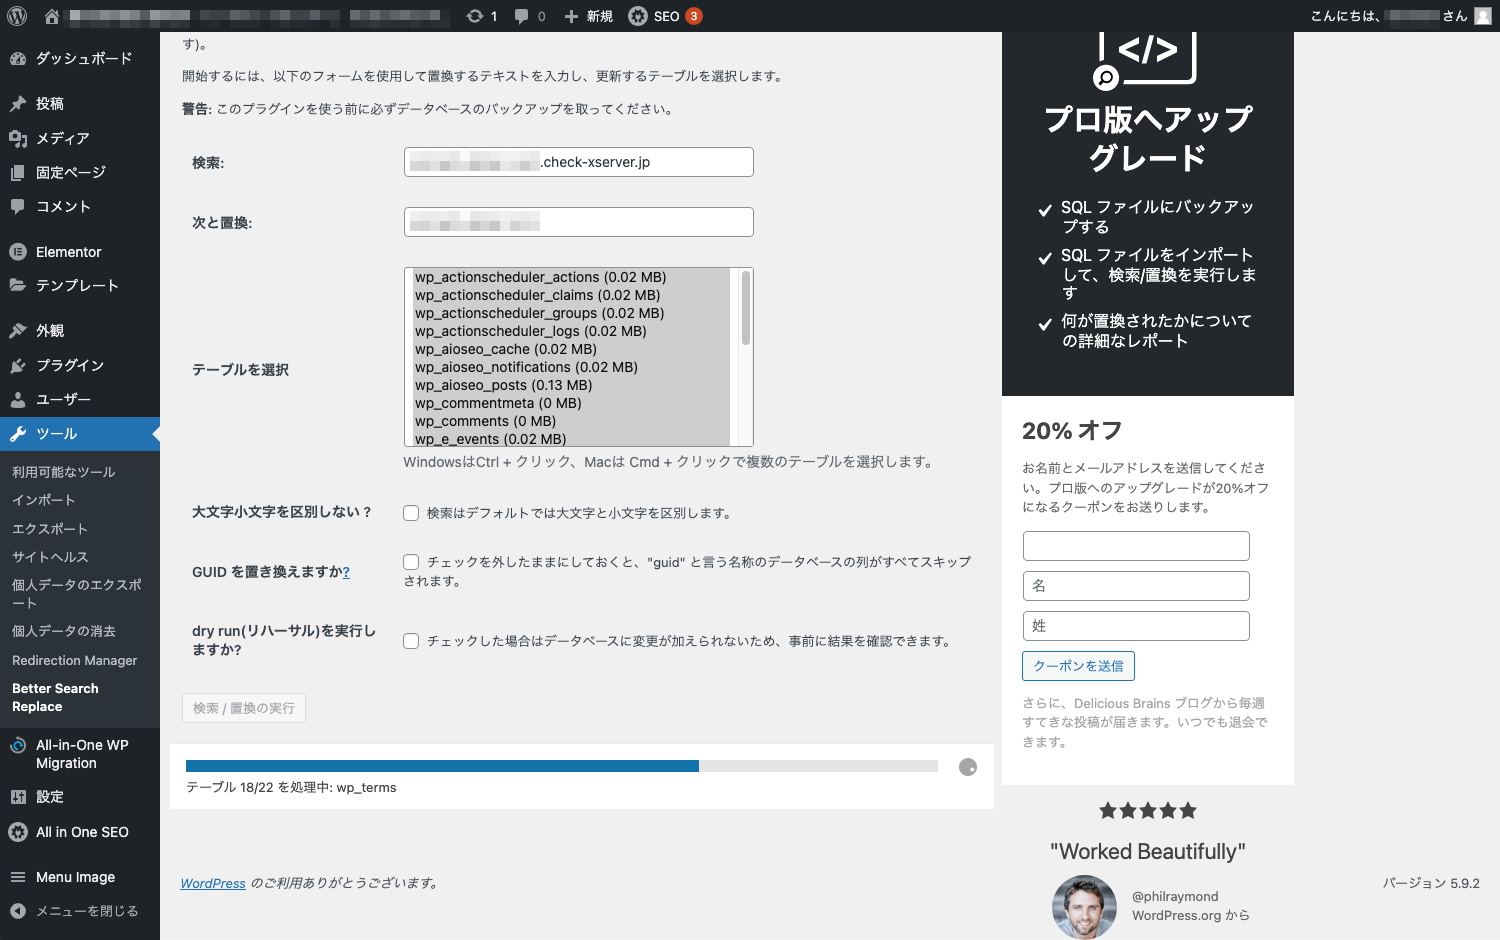 「Better Search Replace」で置換を実行-1